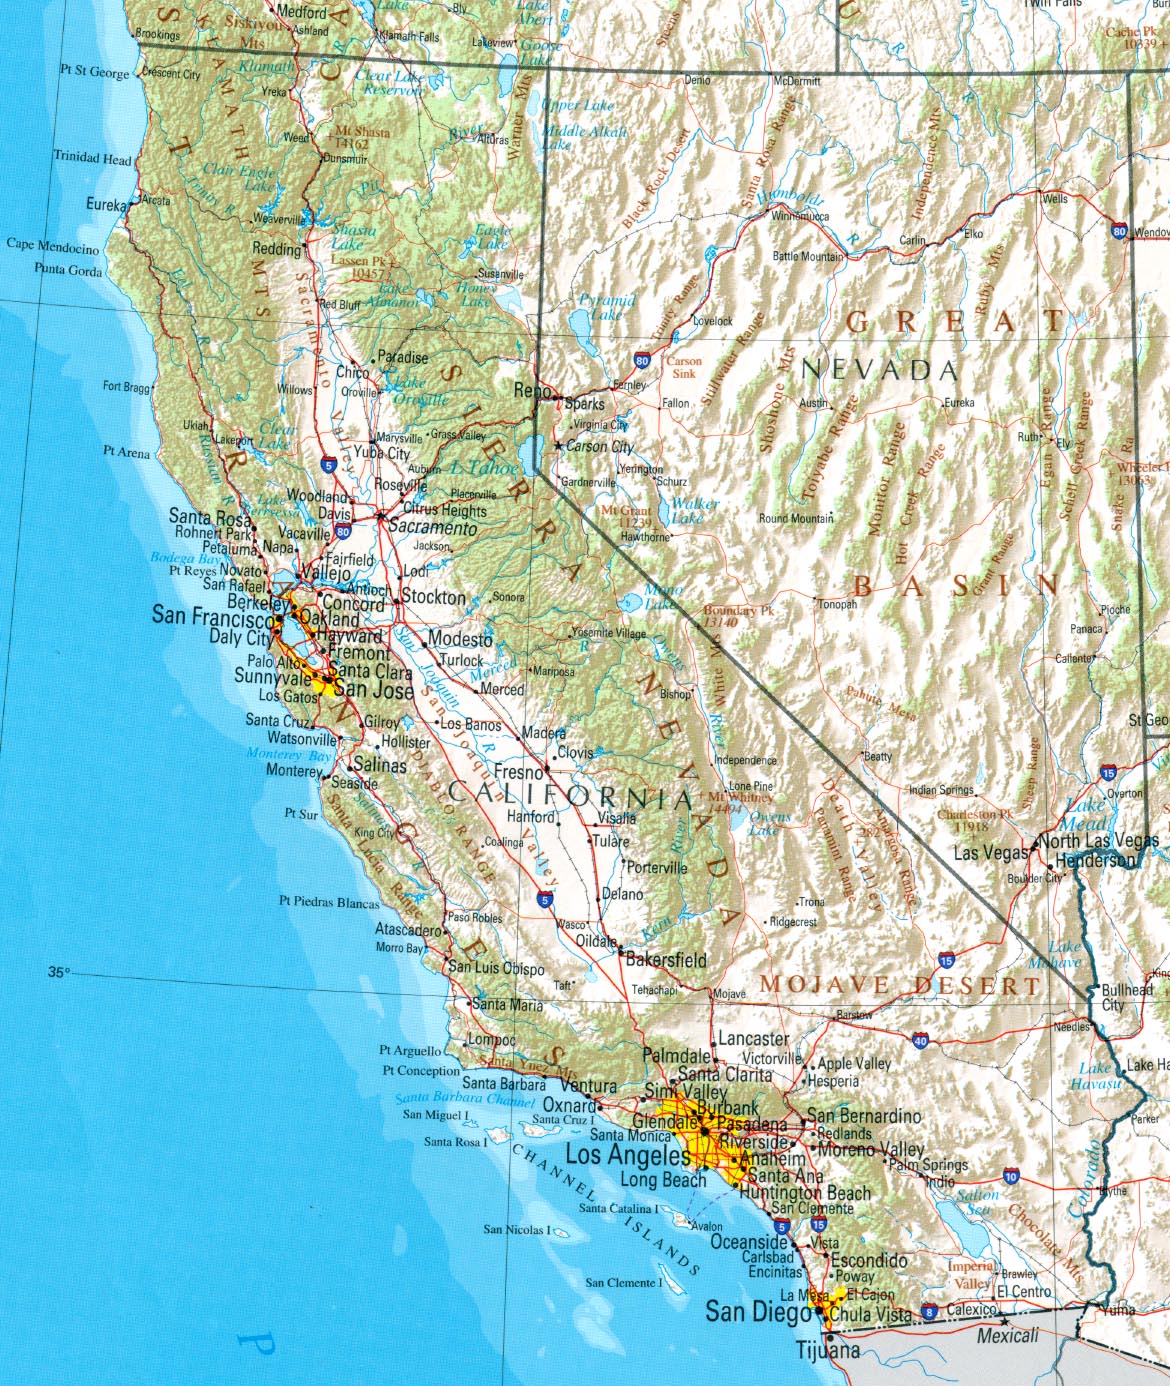 news tourism world: Geography Map of California Area